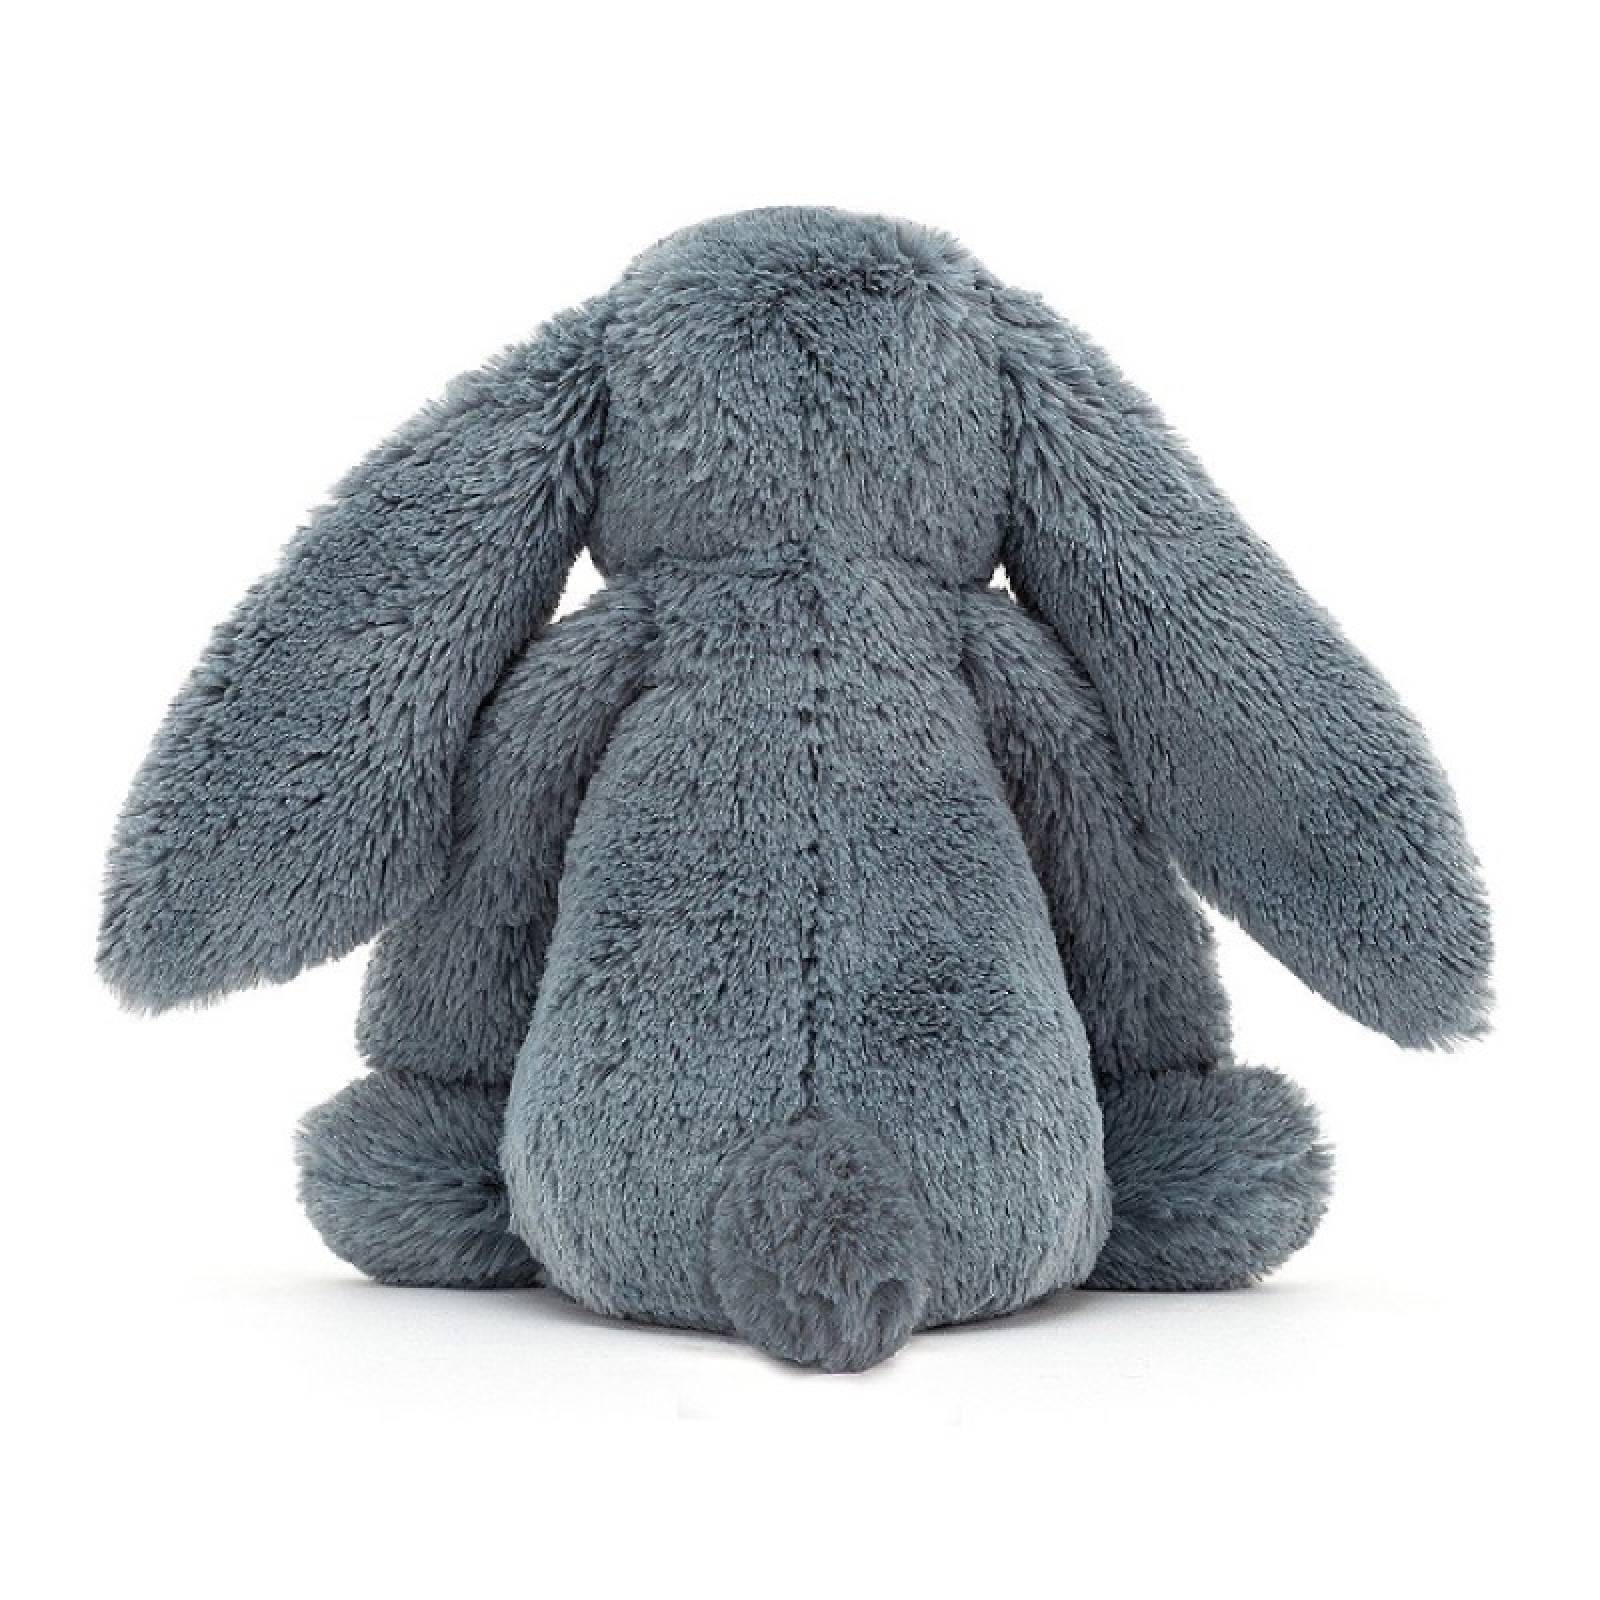 Medium Blossom Bunny In Dusky Blue Soft Toy By Jellycat thumbnails